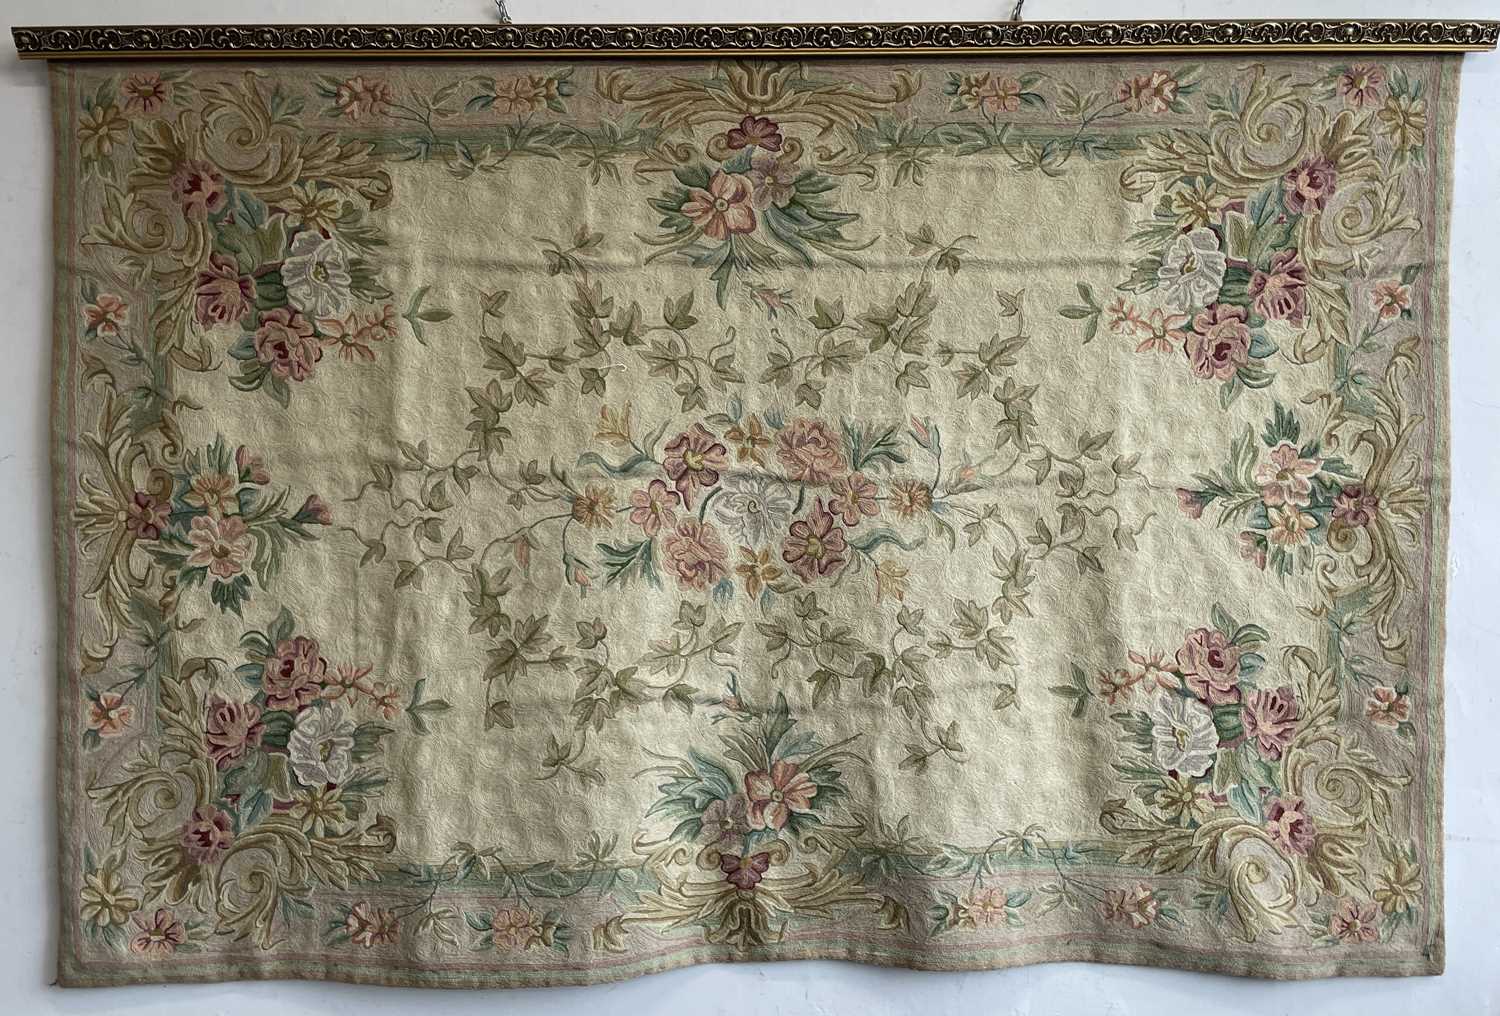 An Aubusson-type floral design wall hanging, mounted on gilded wood hanging rail. Maximum width